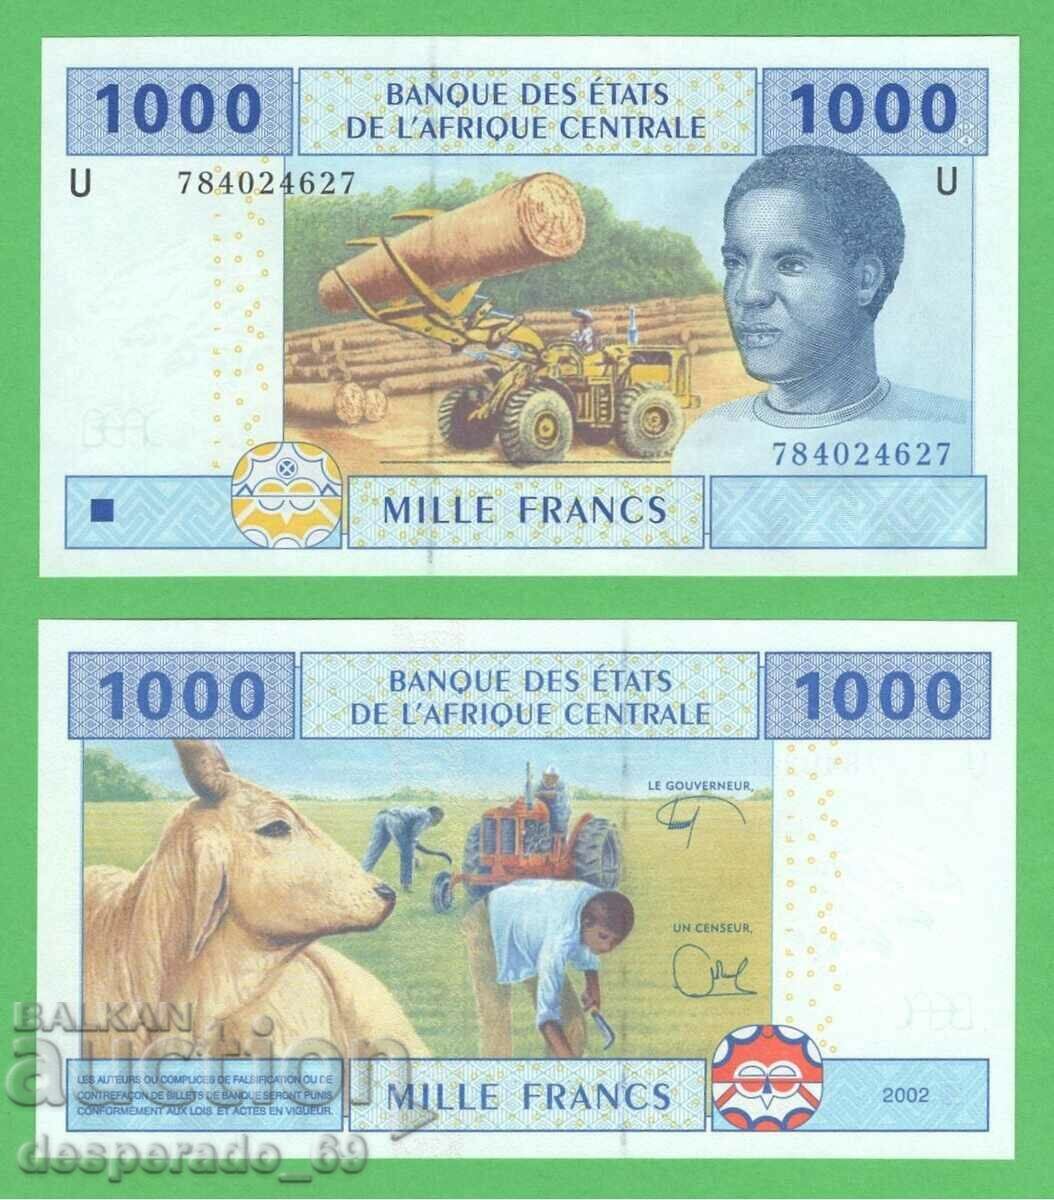 (¯`'•.¸ CENTRAL AFRICAN STATES 1000 francs 2002 UNC